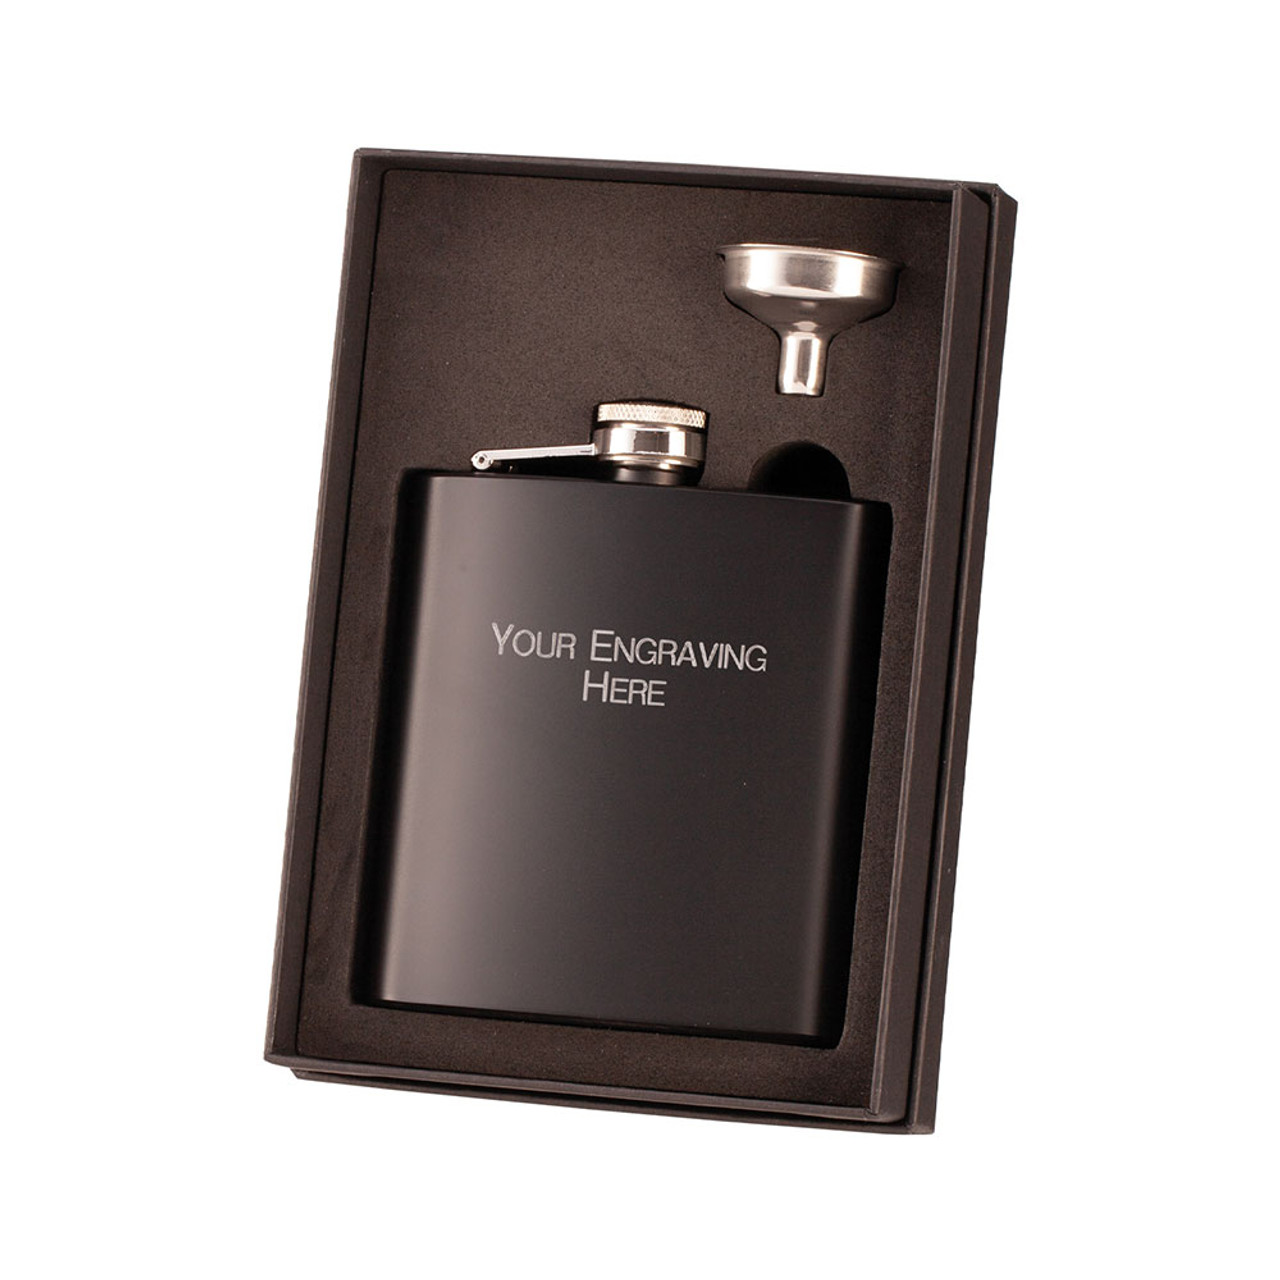 Personalised Black Hip Flask 6oz With Funnel Gift Father's Day Dad's Birthday Brother Uncle Grandad Grandpa Godfather Groom Best Man Present For Men 